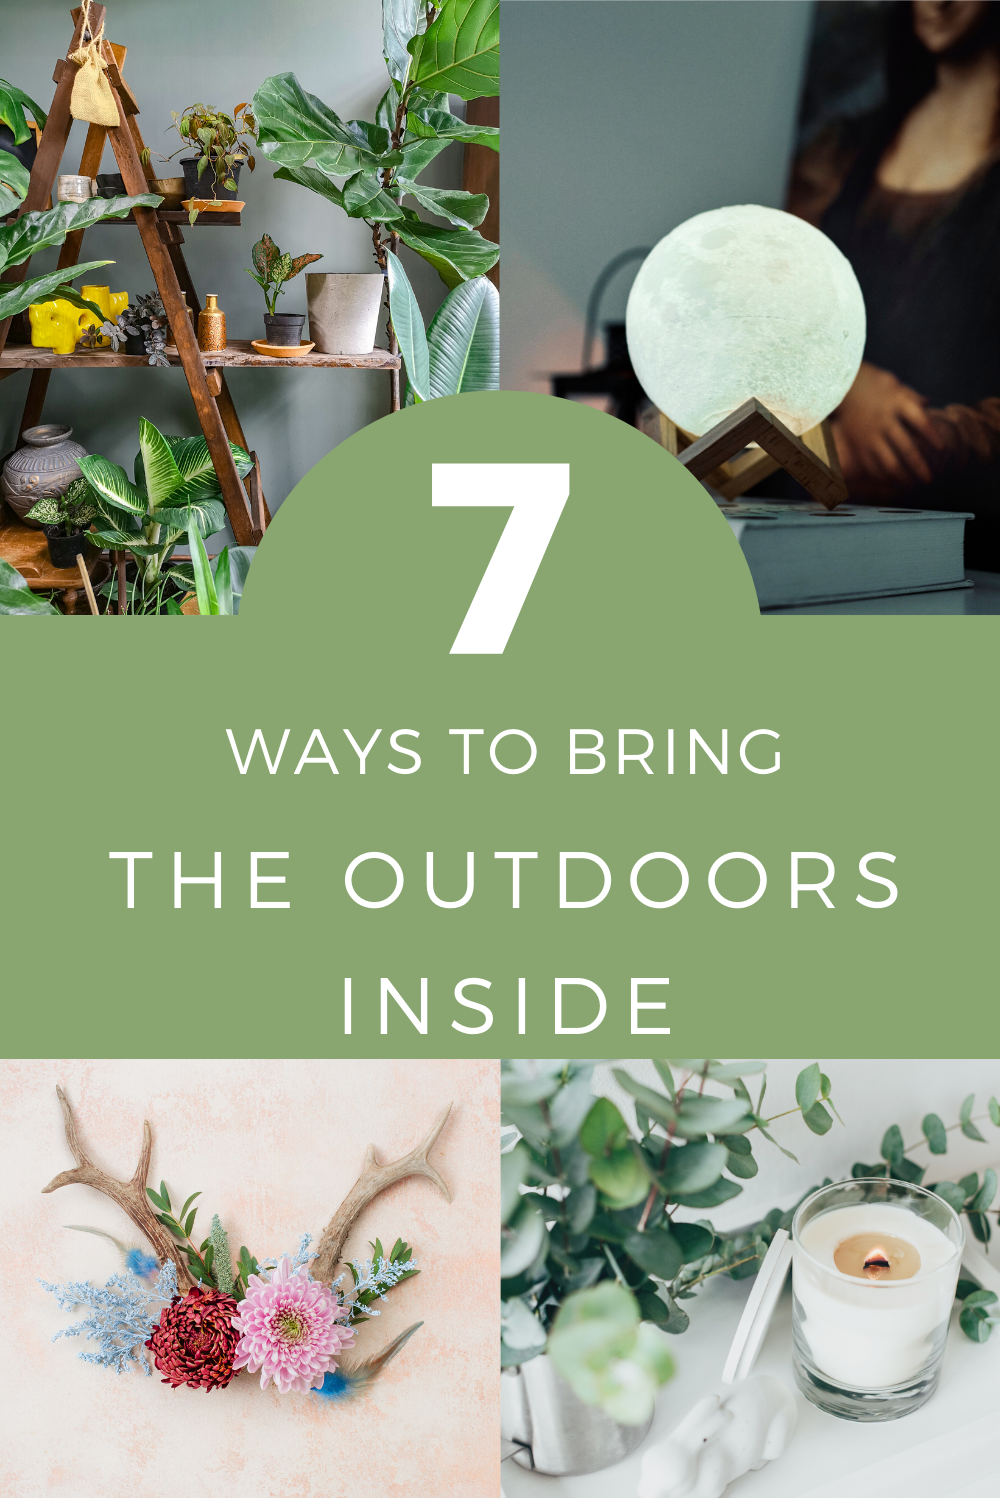 7 ways to bring the outdoors inside. How to's, DIYs, & interiors that will help you bring the wonder of the outdoors inside your home. Using natures elements like wood, water, light, and plants and decorate your home to be closer connected with nature and the outdoors.